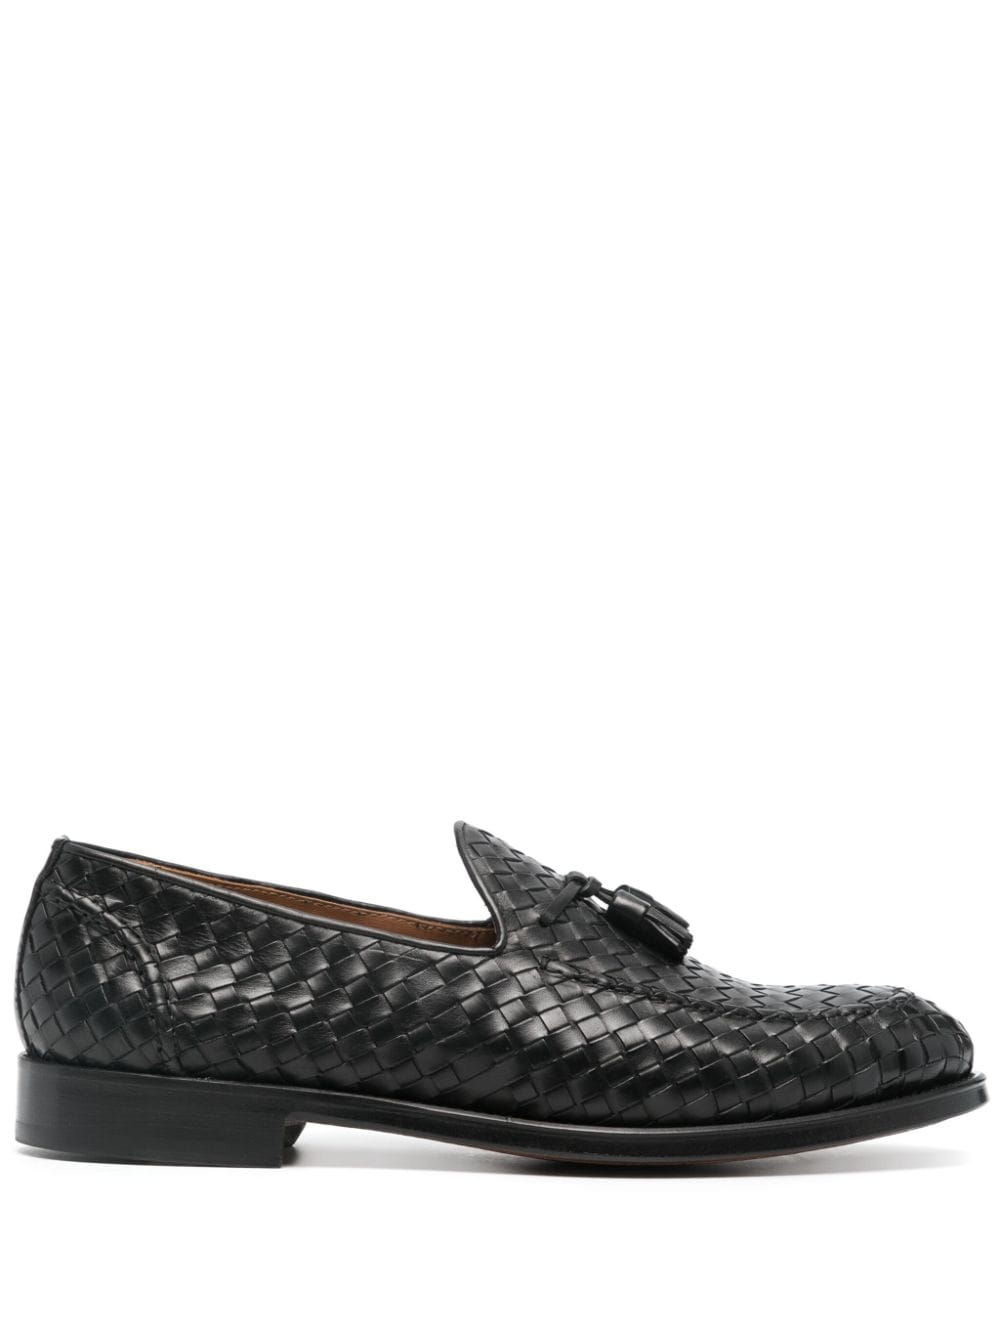 Doucal's interwoven leather loafers - Black von Doucal's